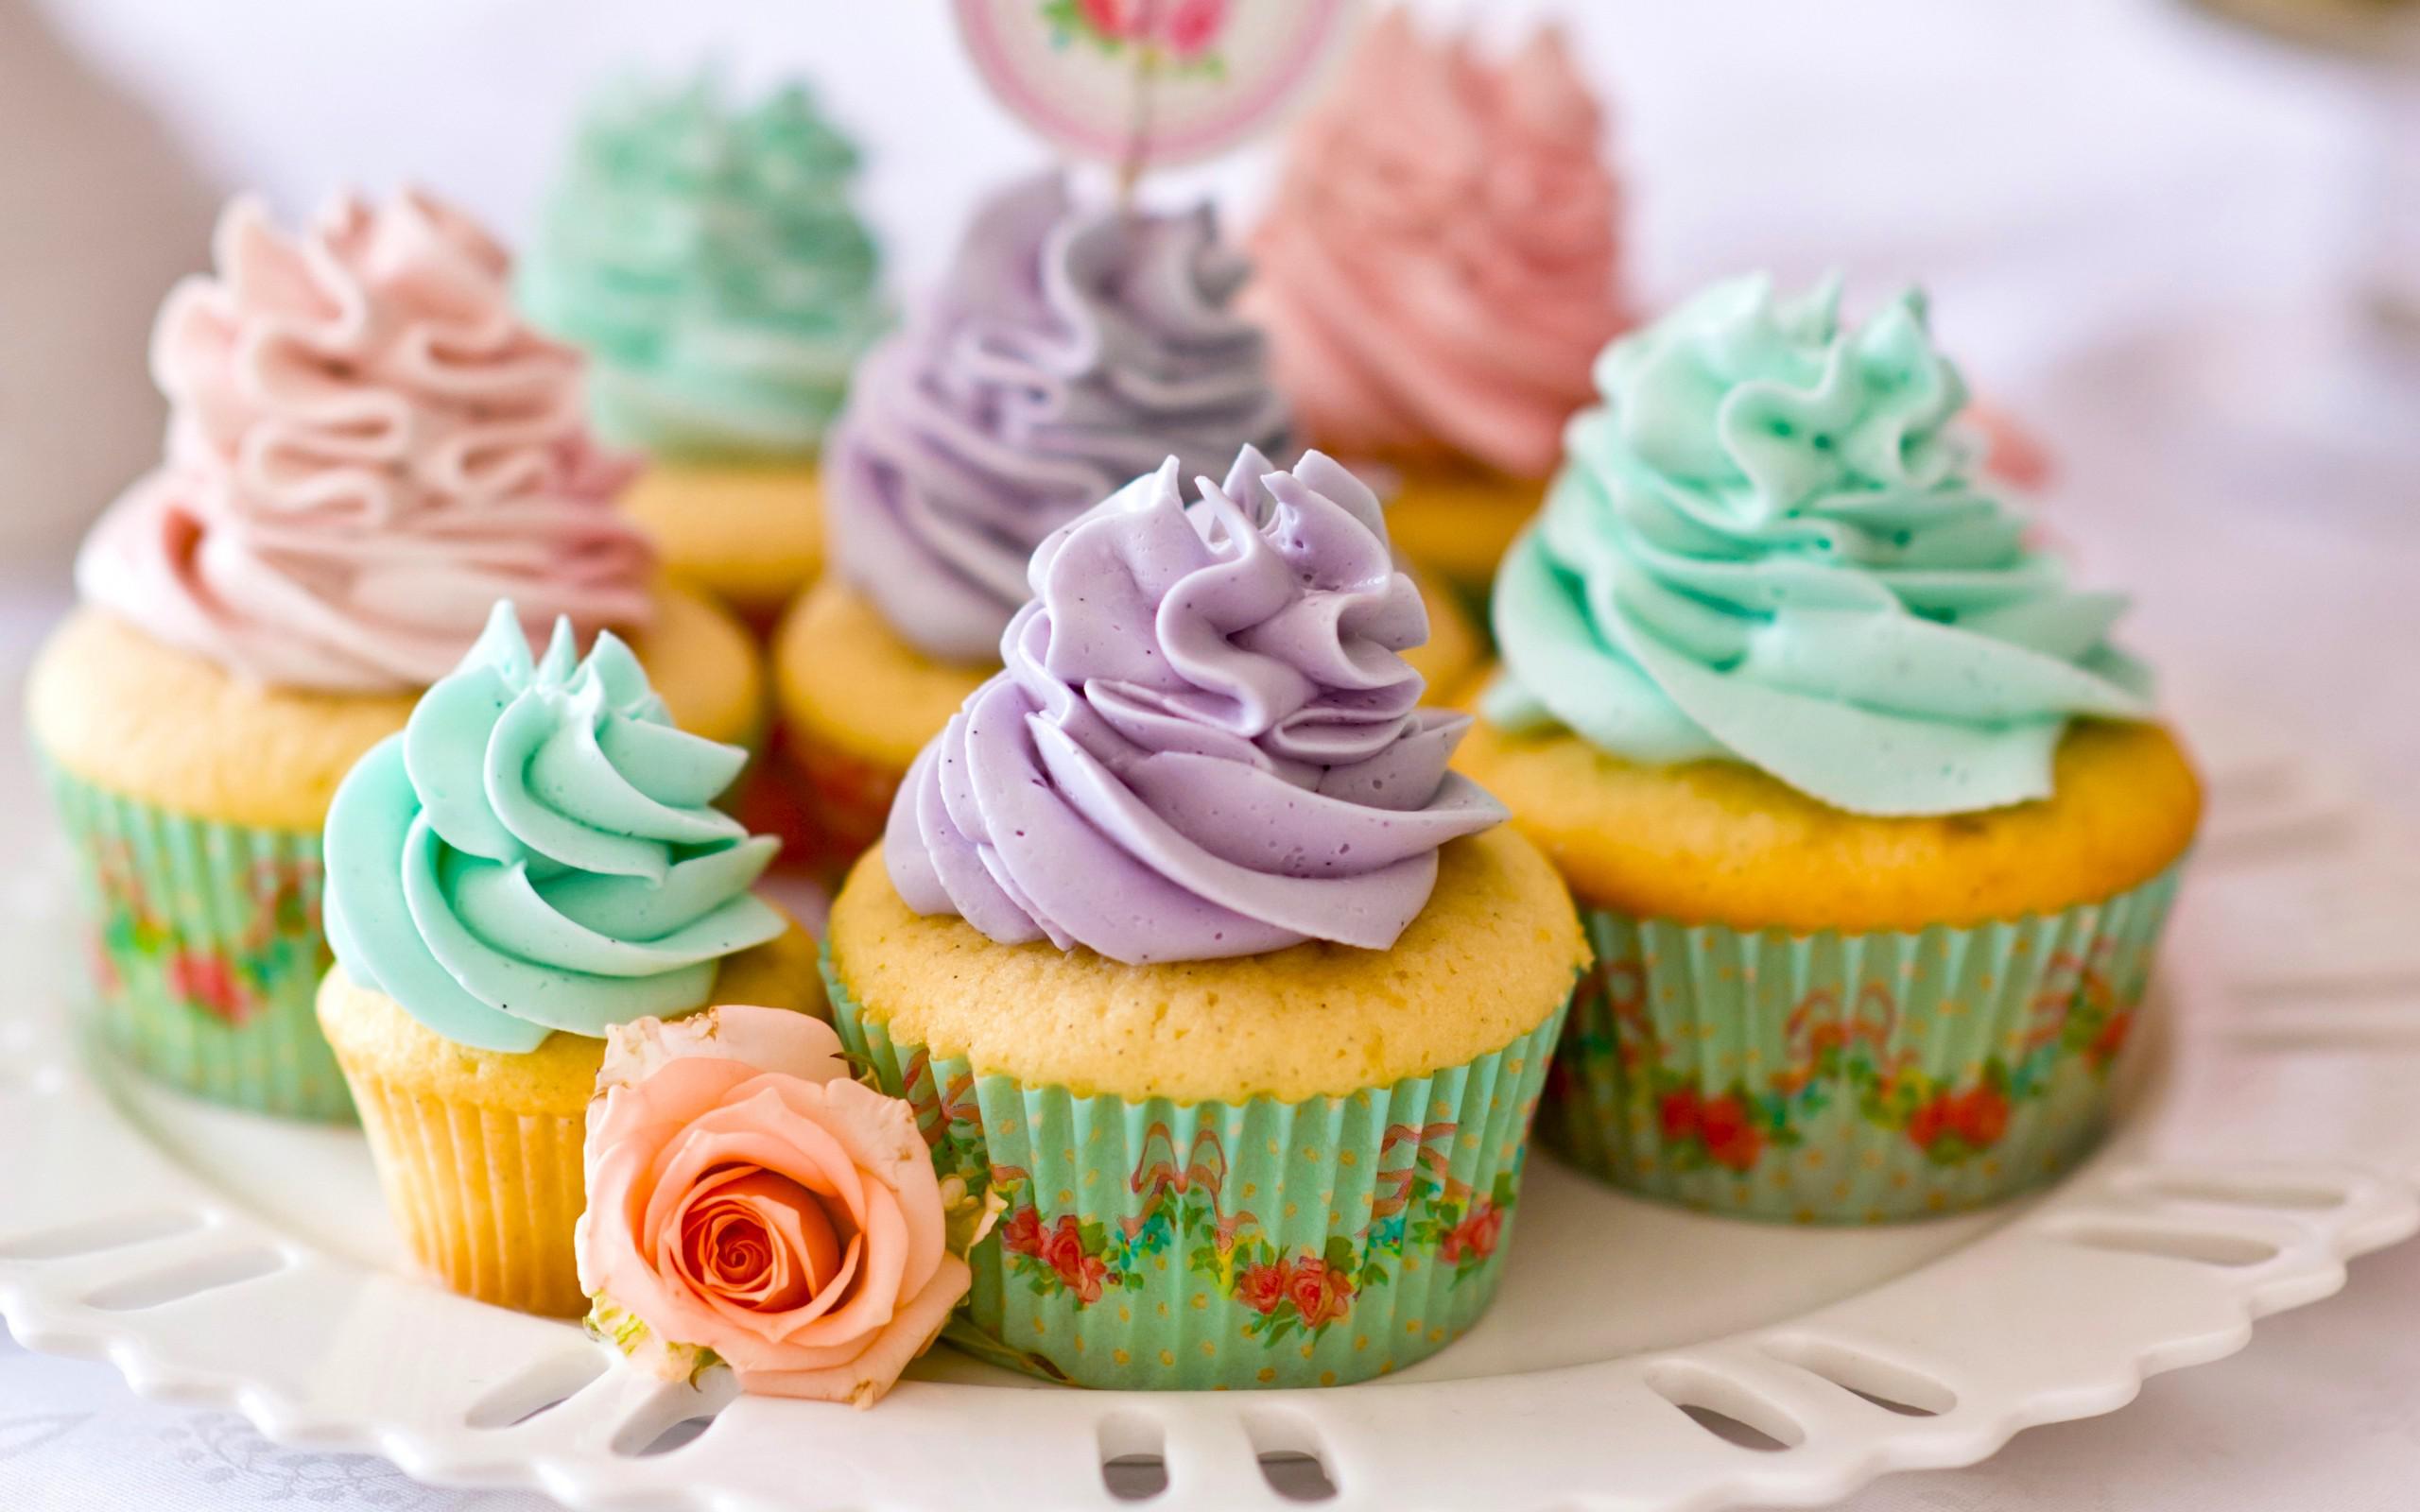 Download Free HQ Cupcakes Wallpapers - hqwallbase.pw